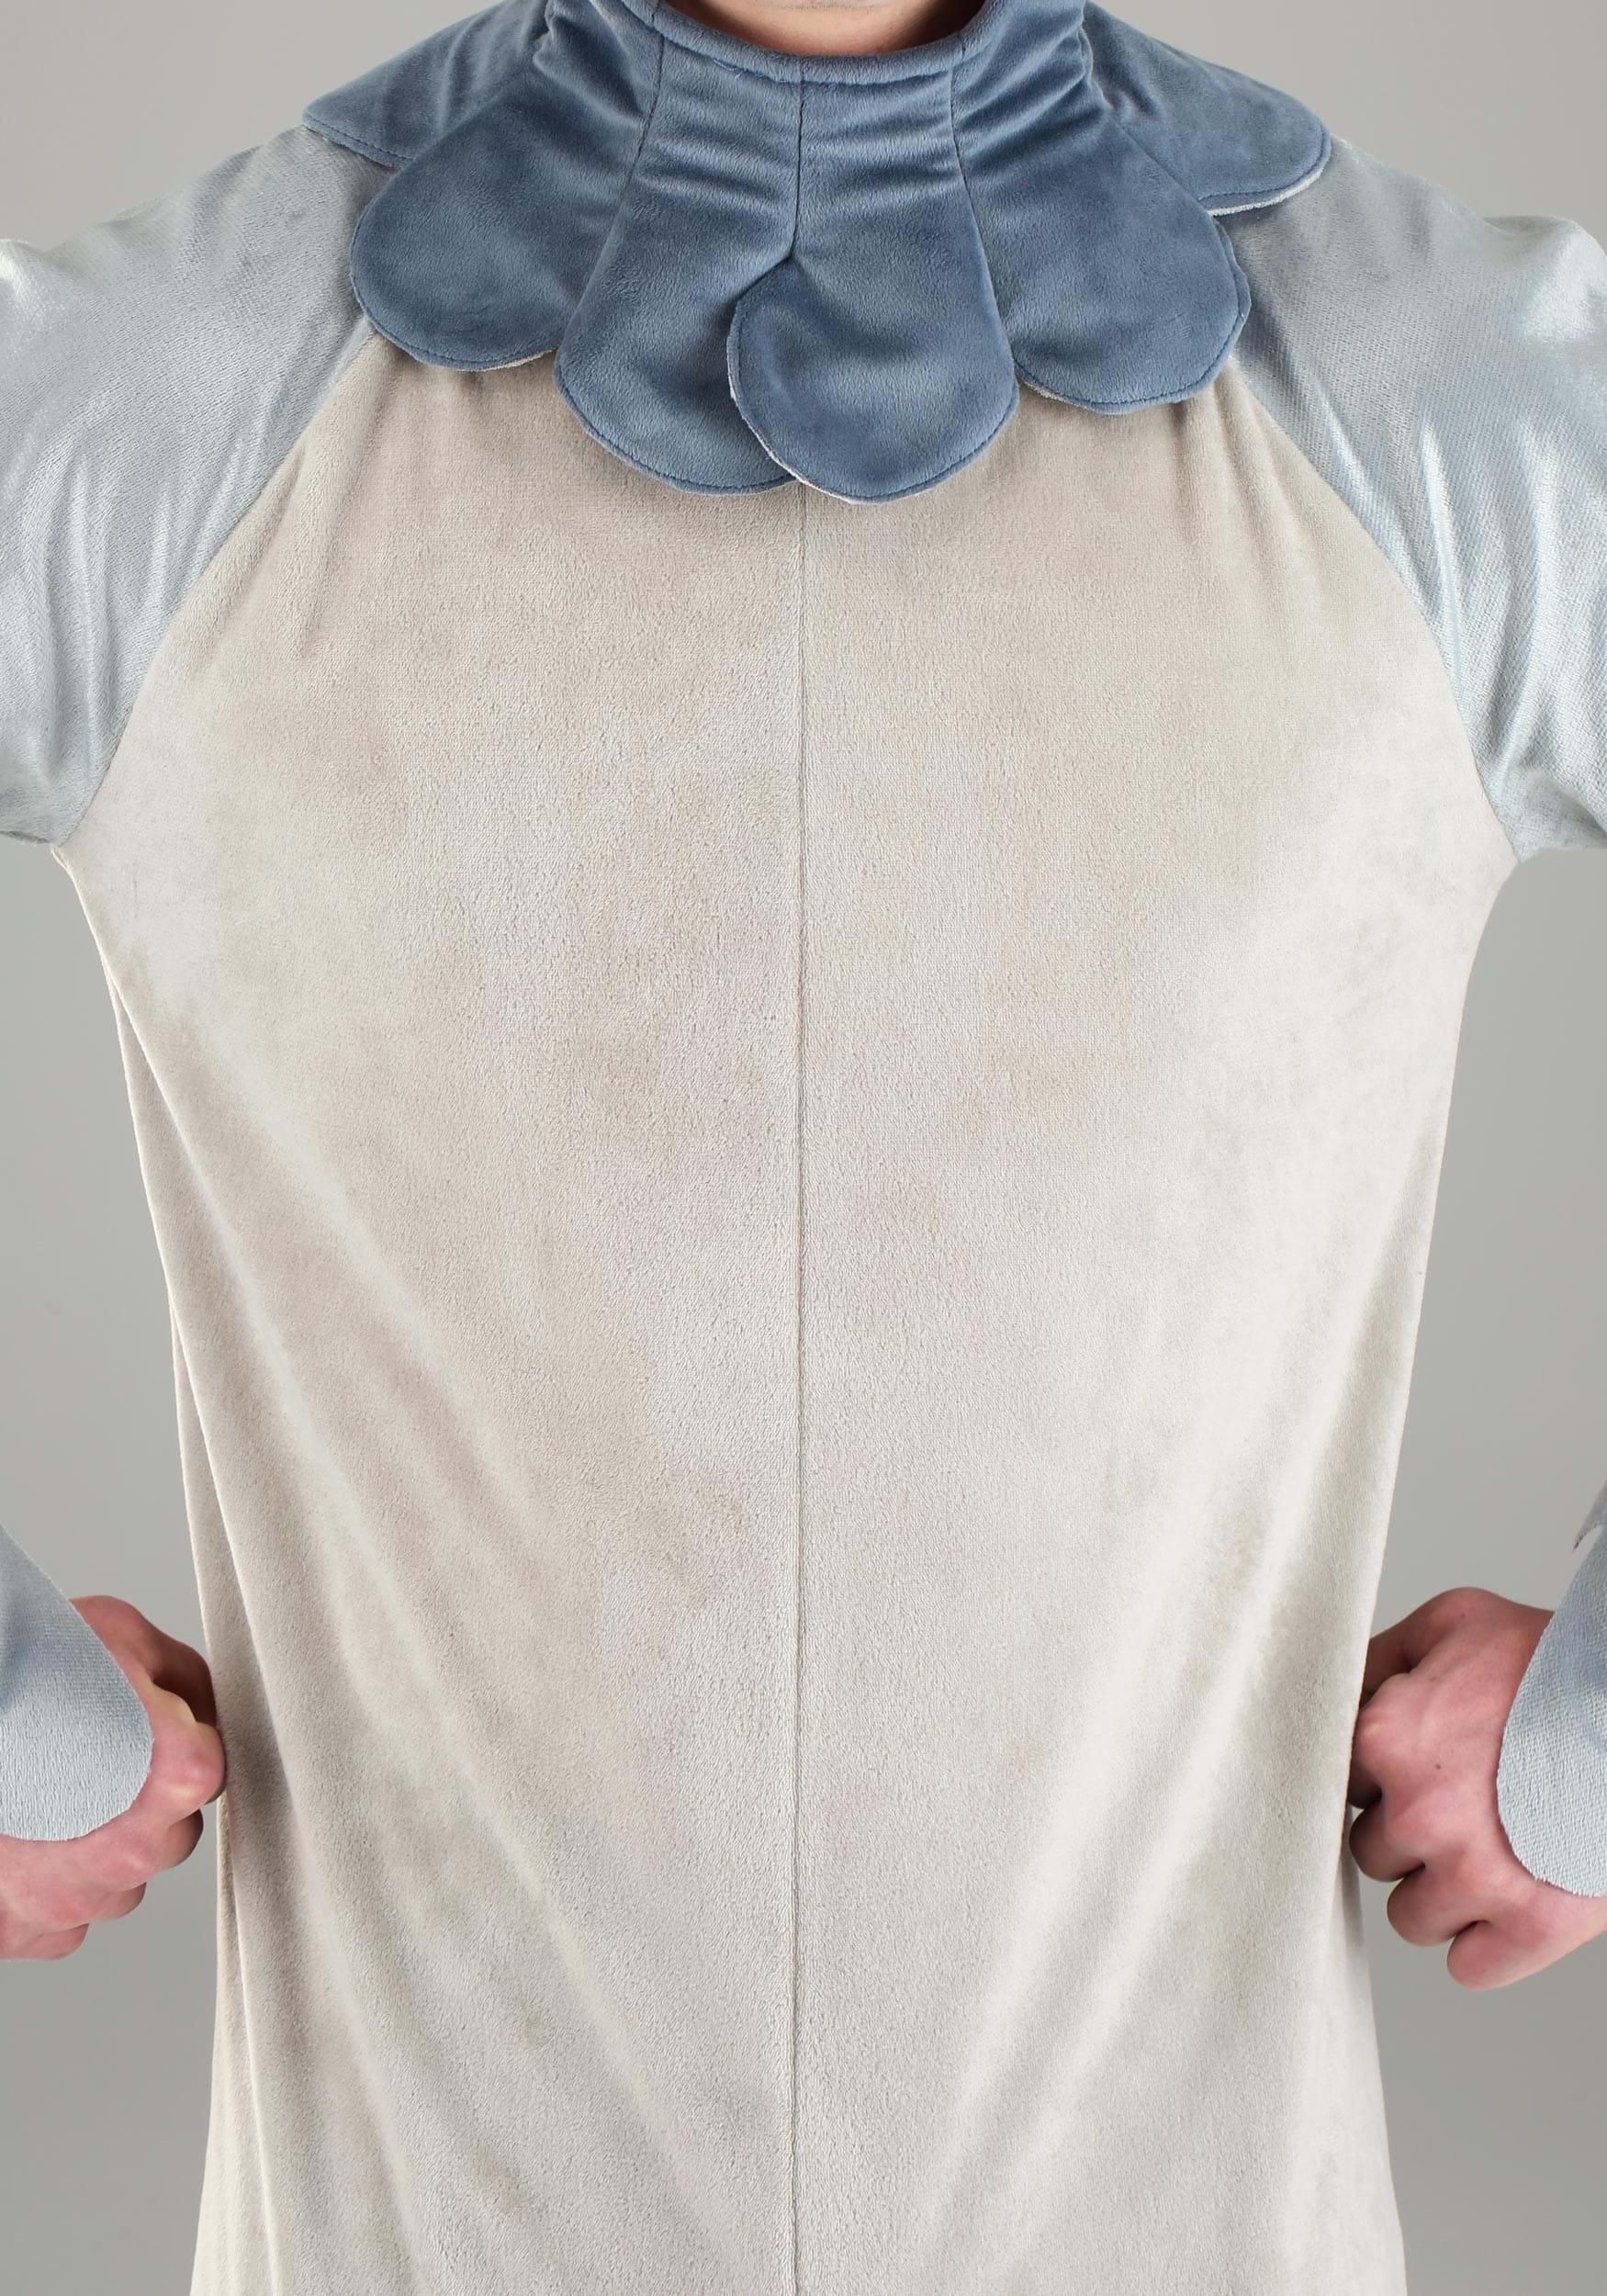 City Slicker Pigeon Costume For Adults